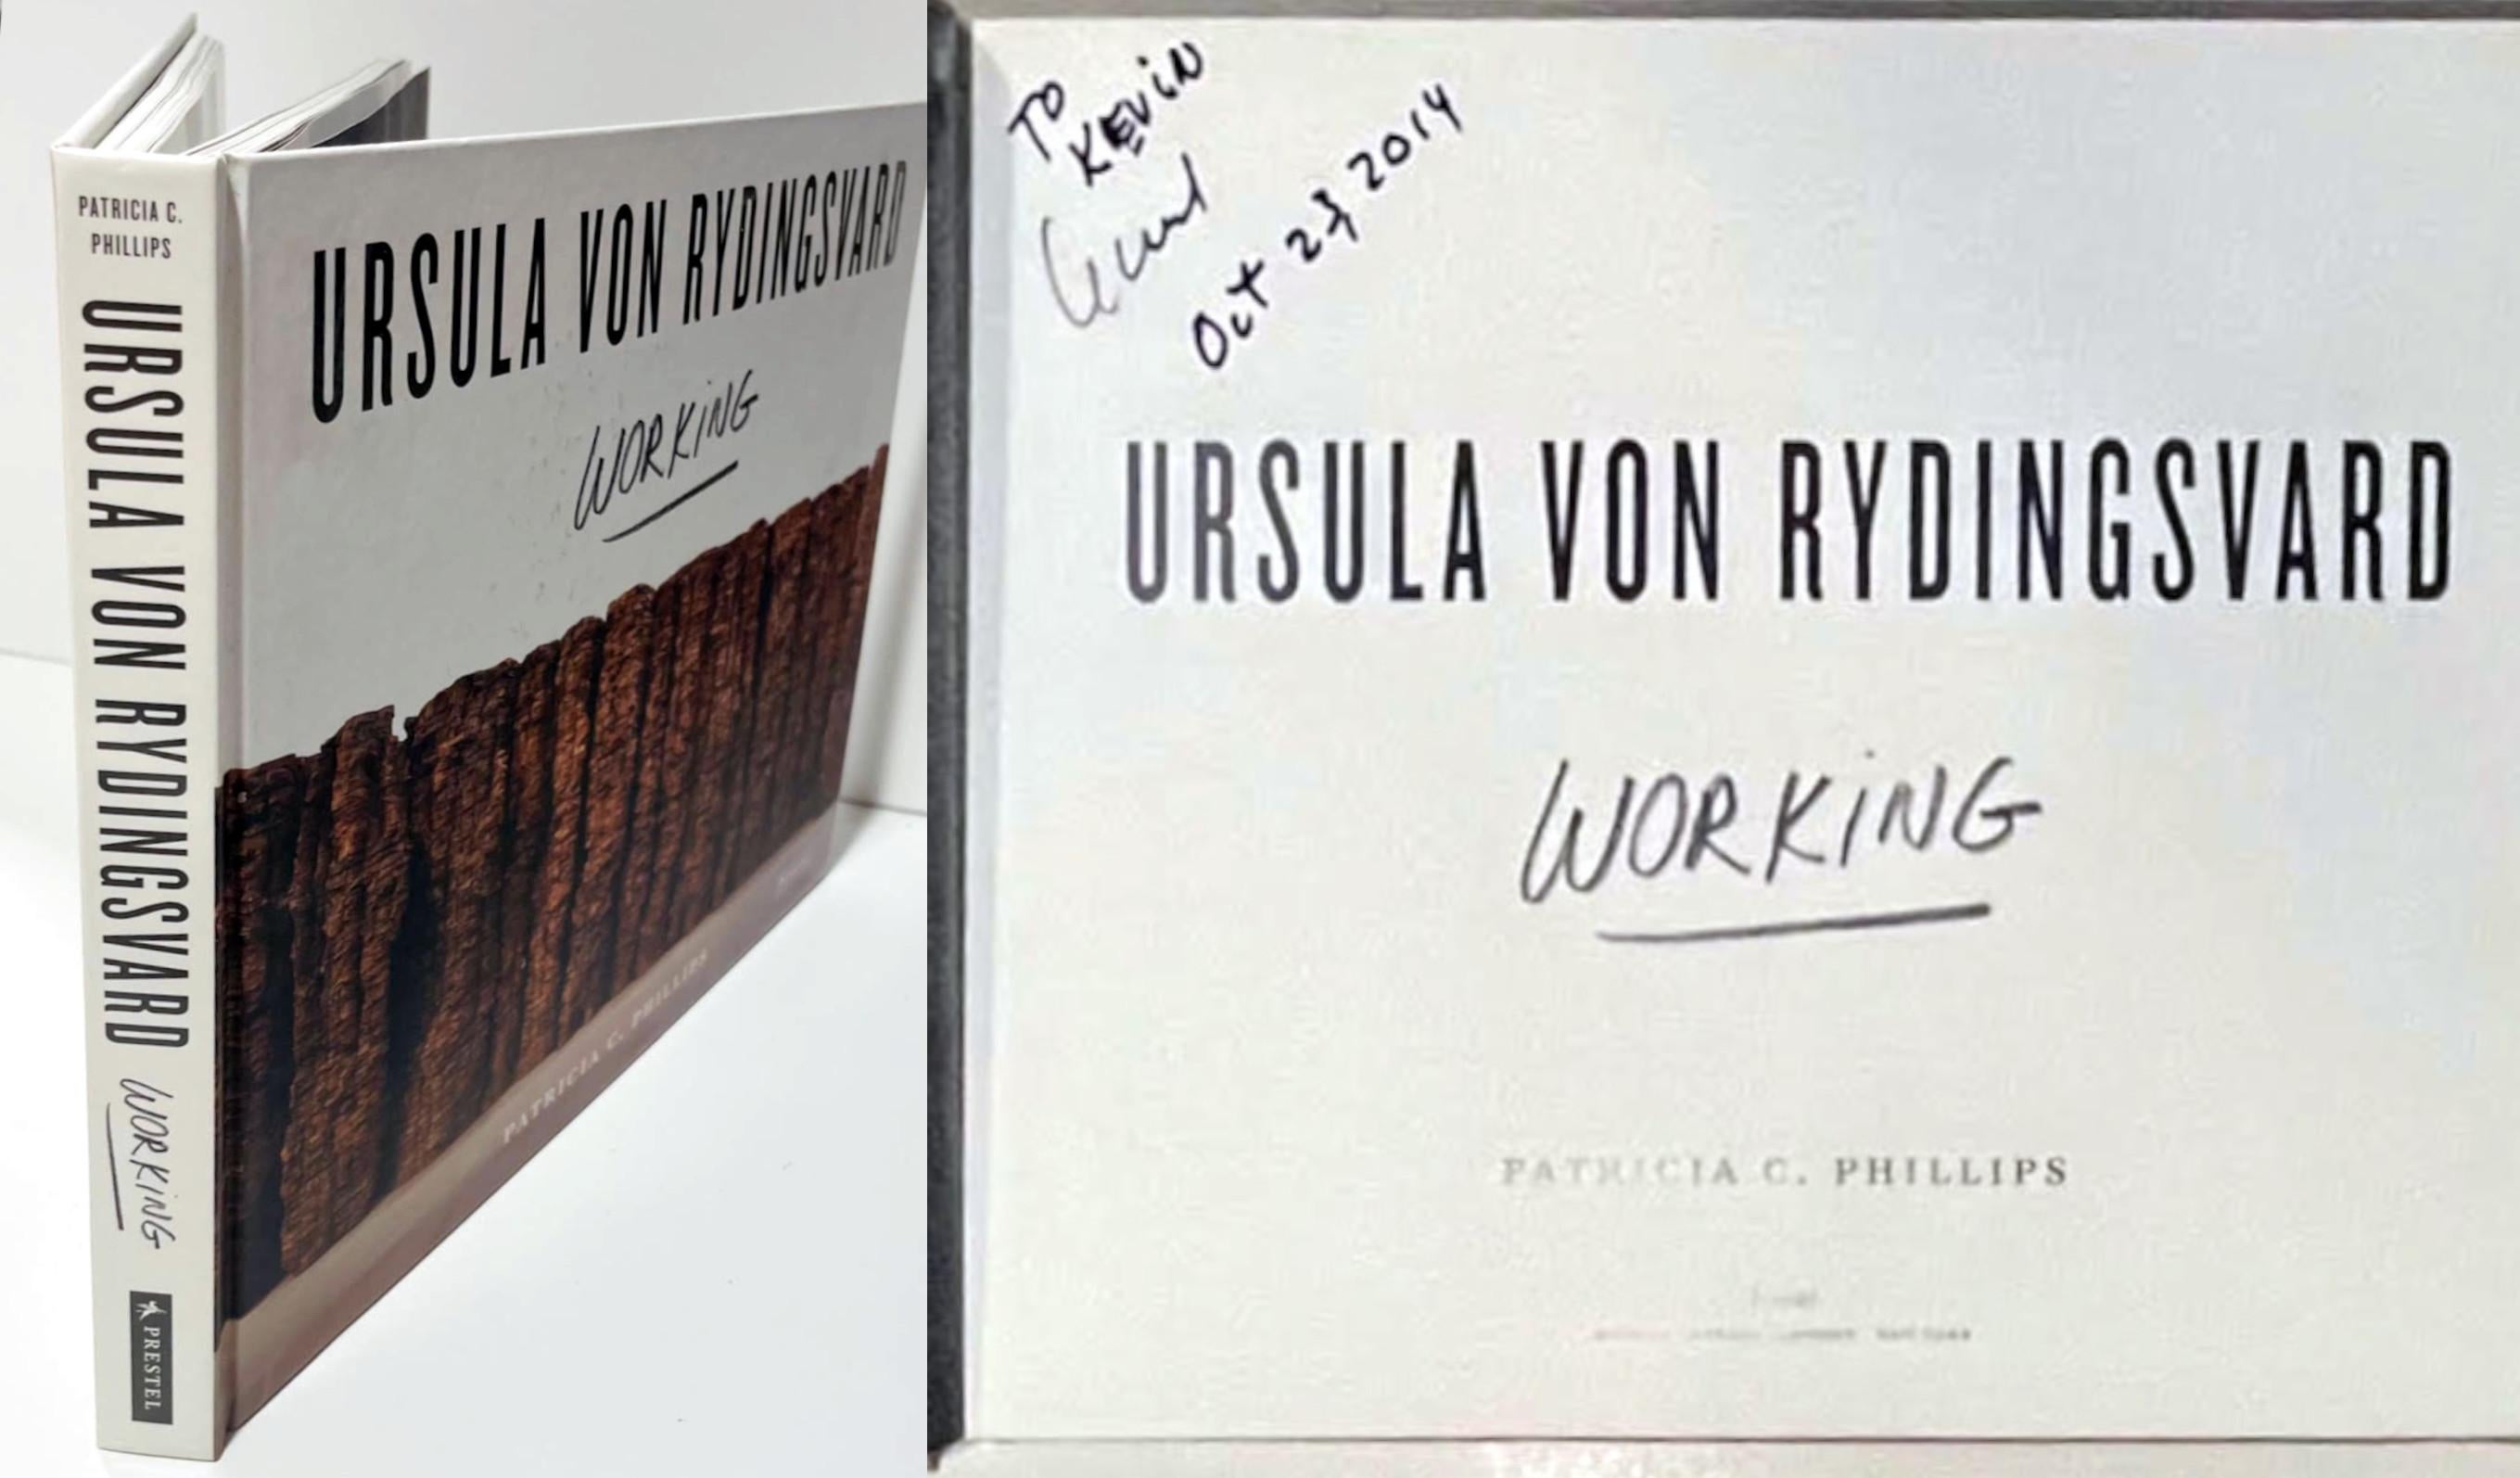 Monograph: Working (Hand signed and inscribed twice by Ursula von Rydingsvard)